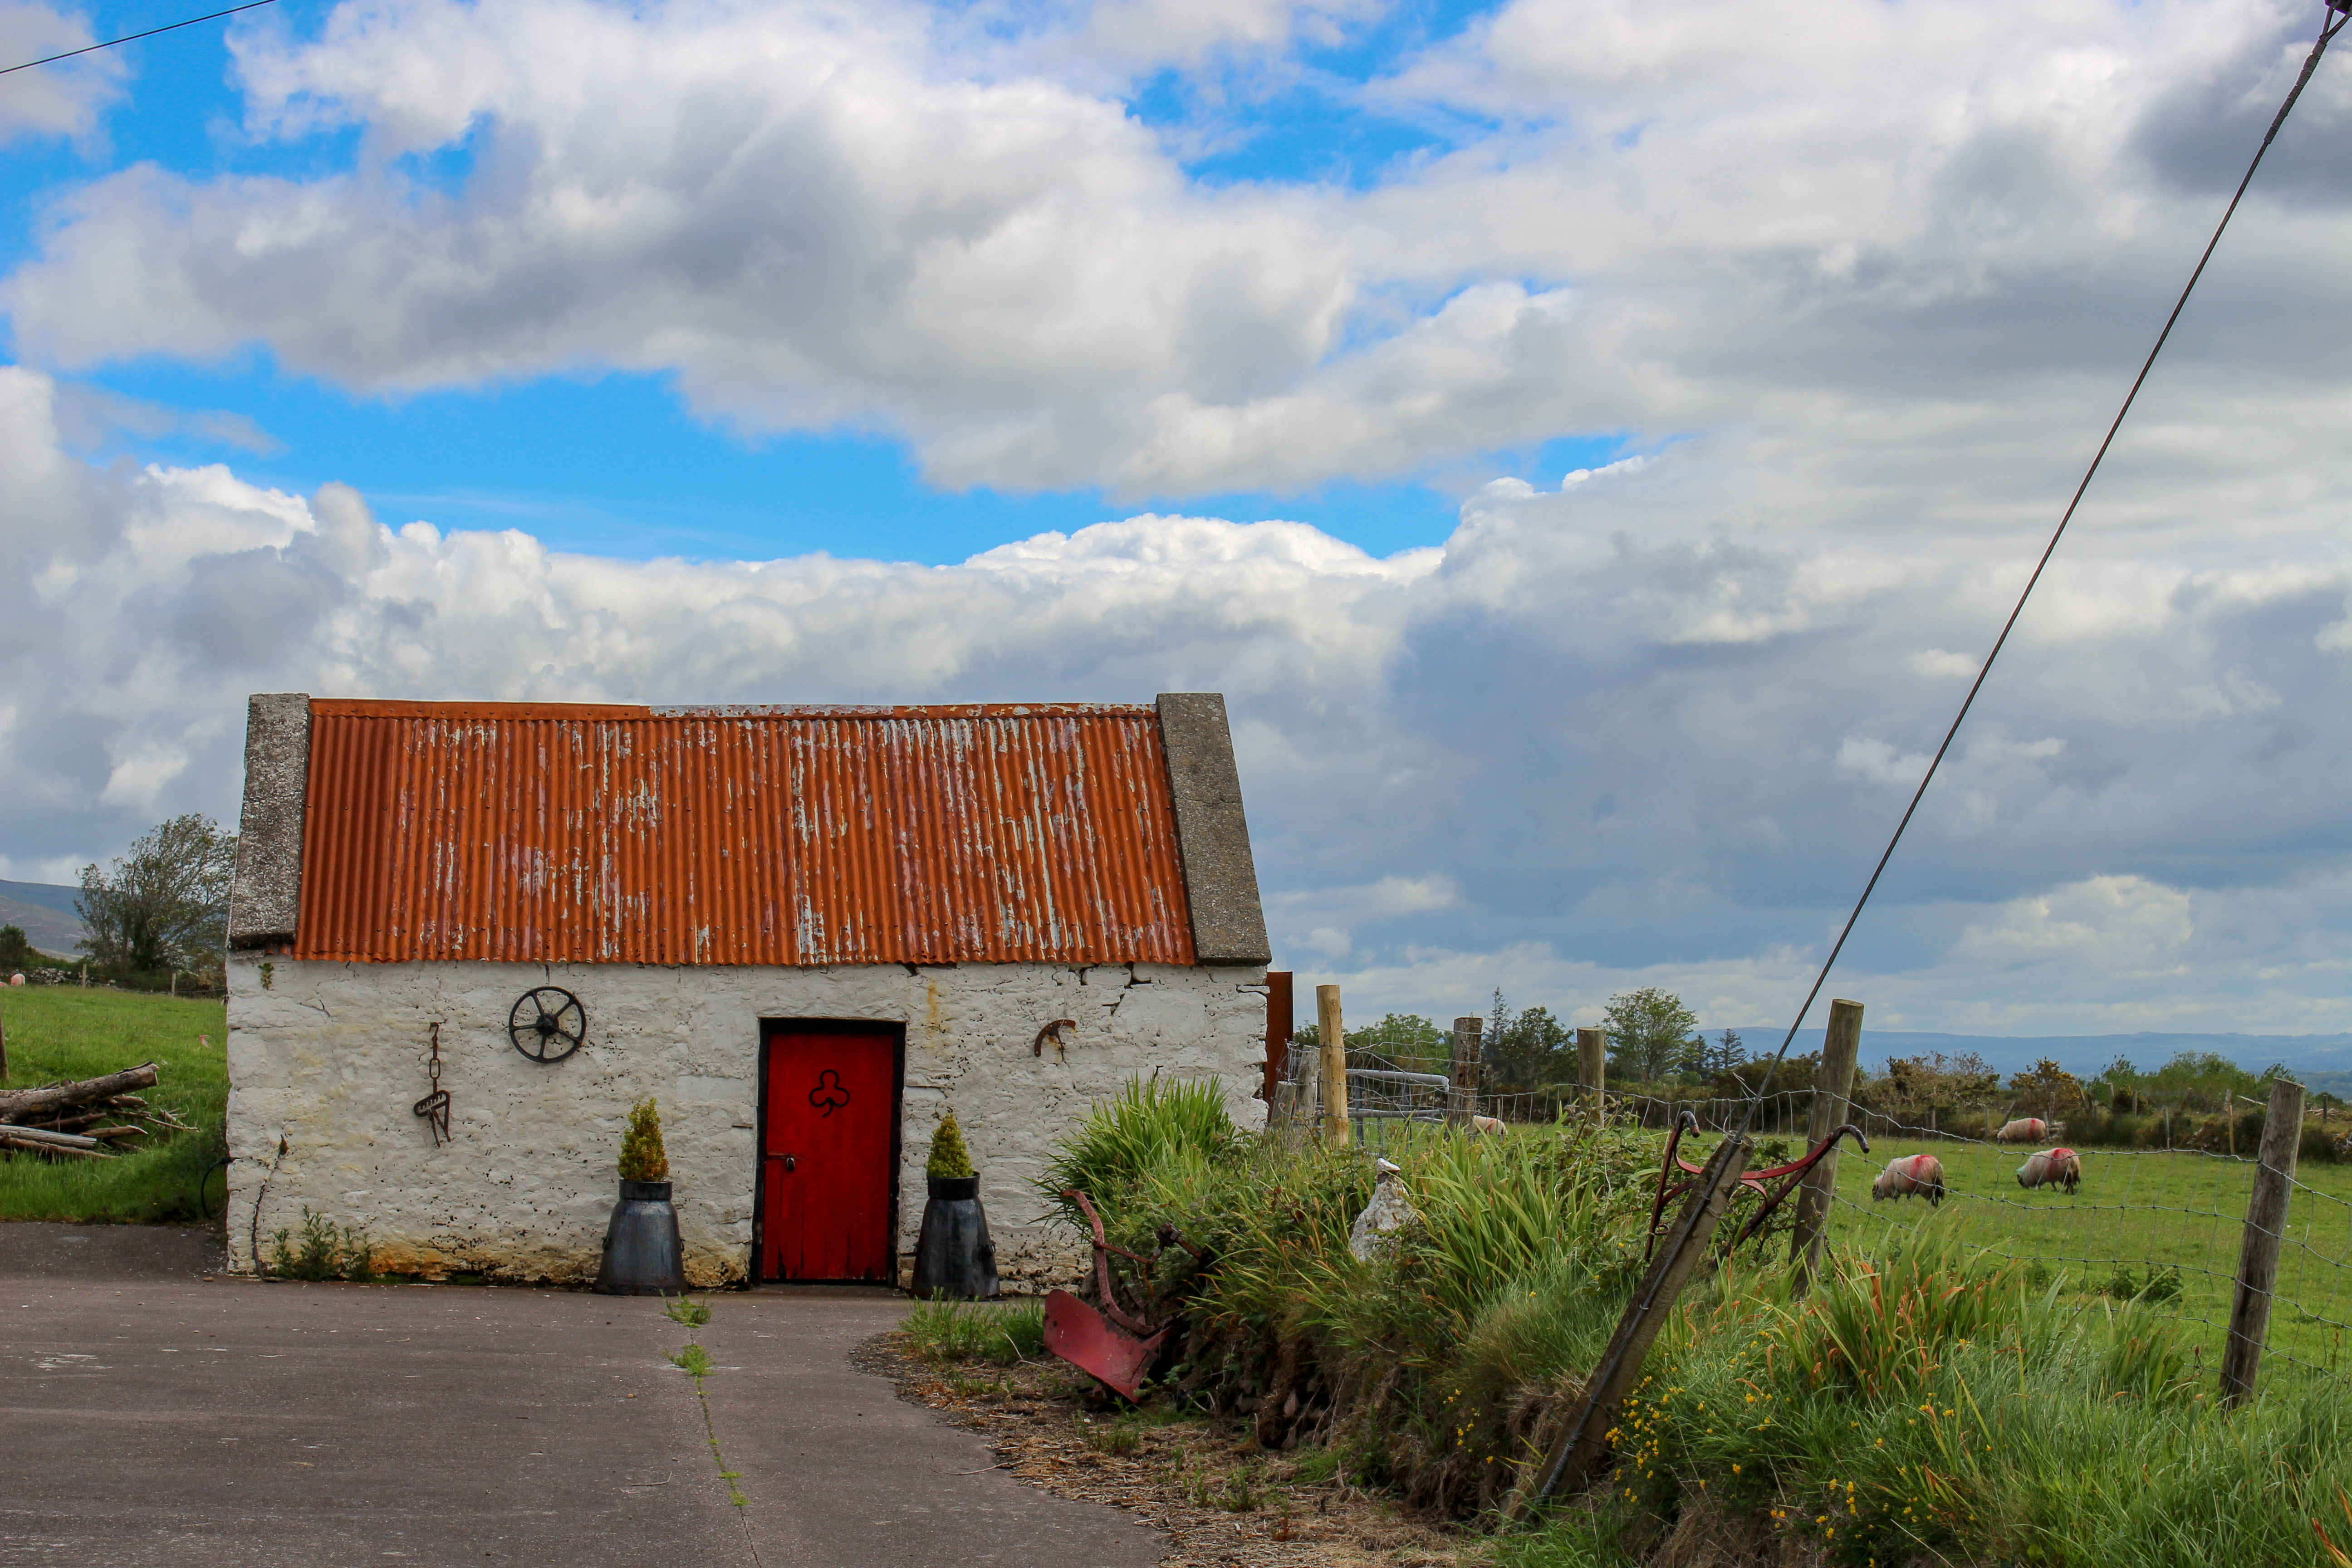 Cottages, barns and shops with colorful doors, flower boxes, and other adornments makes the countryside of Ireland cheery. (Cheryl Welch | Travel Beat Magazine)